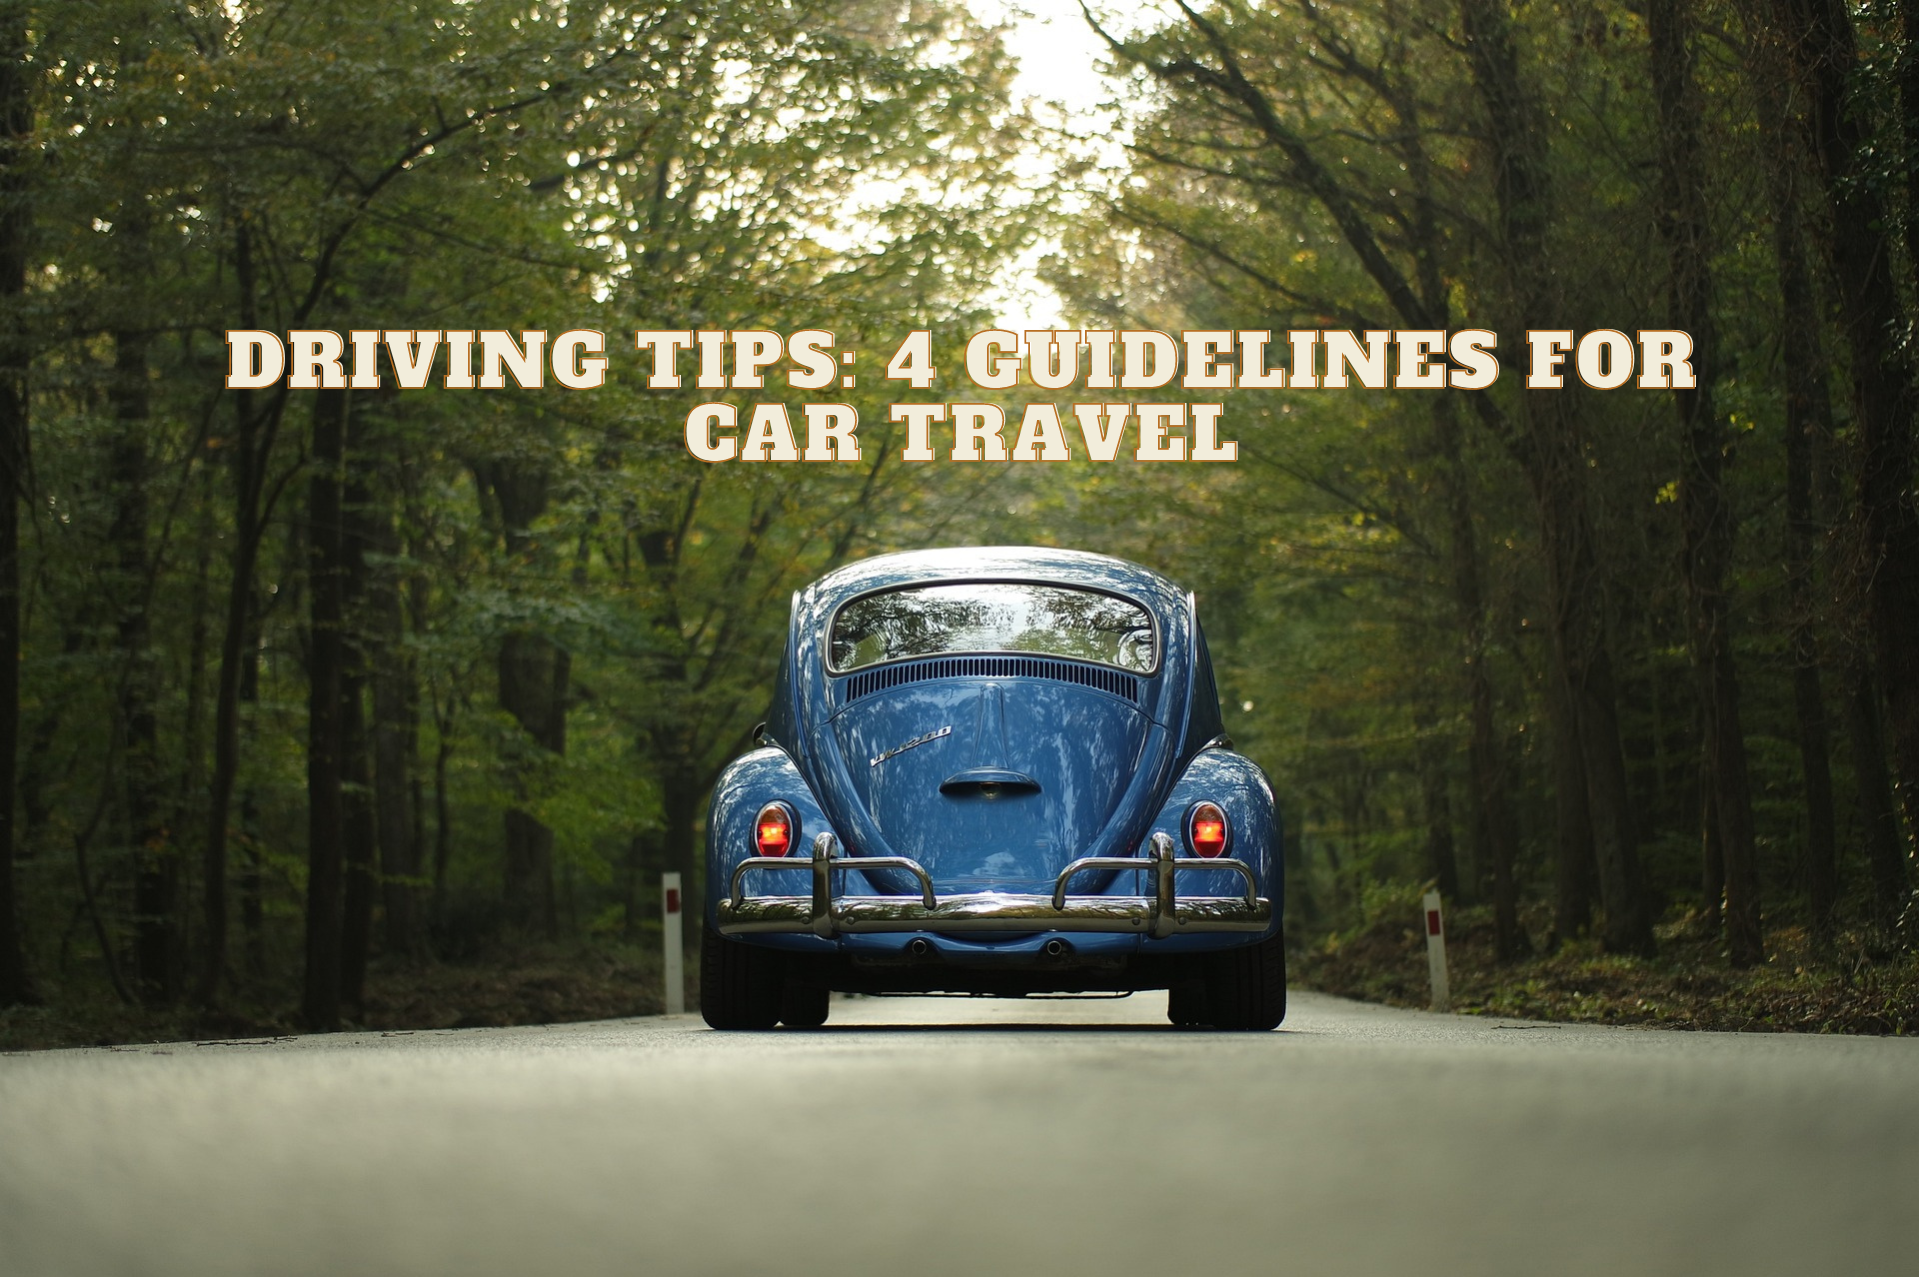 Driving Tips 4 Guidelines for Car Travel